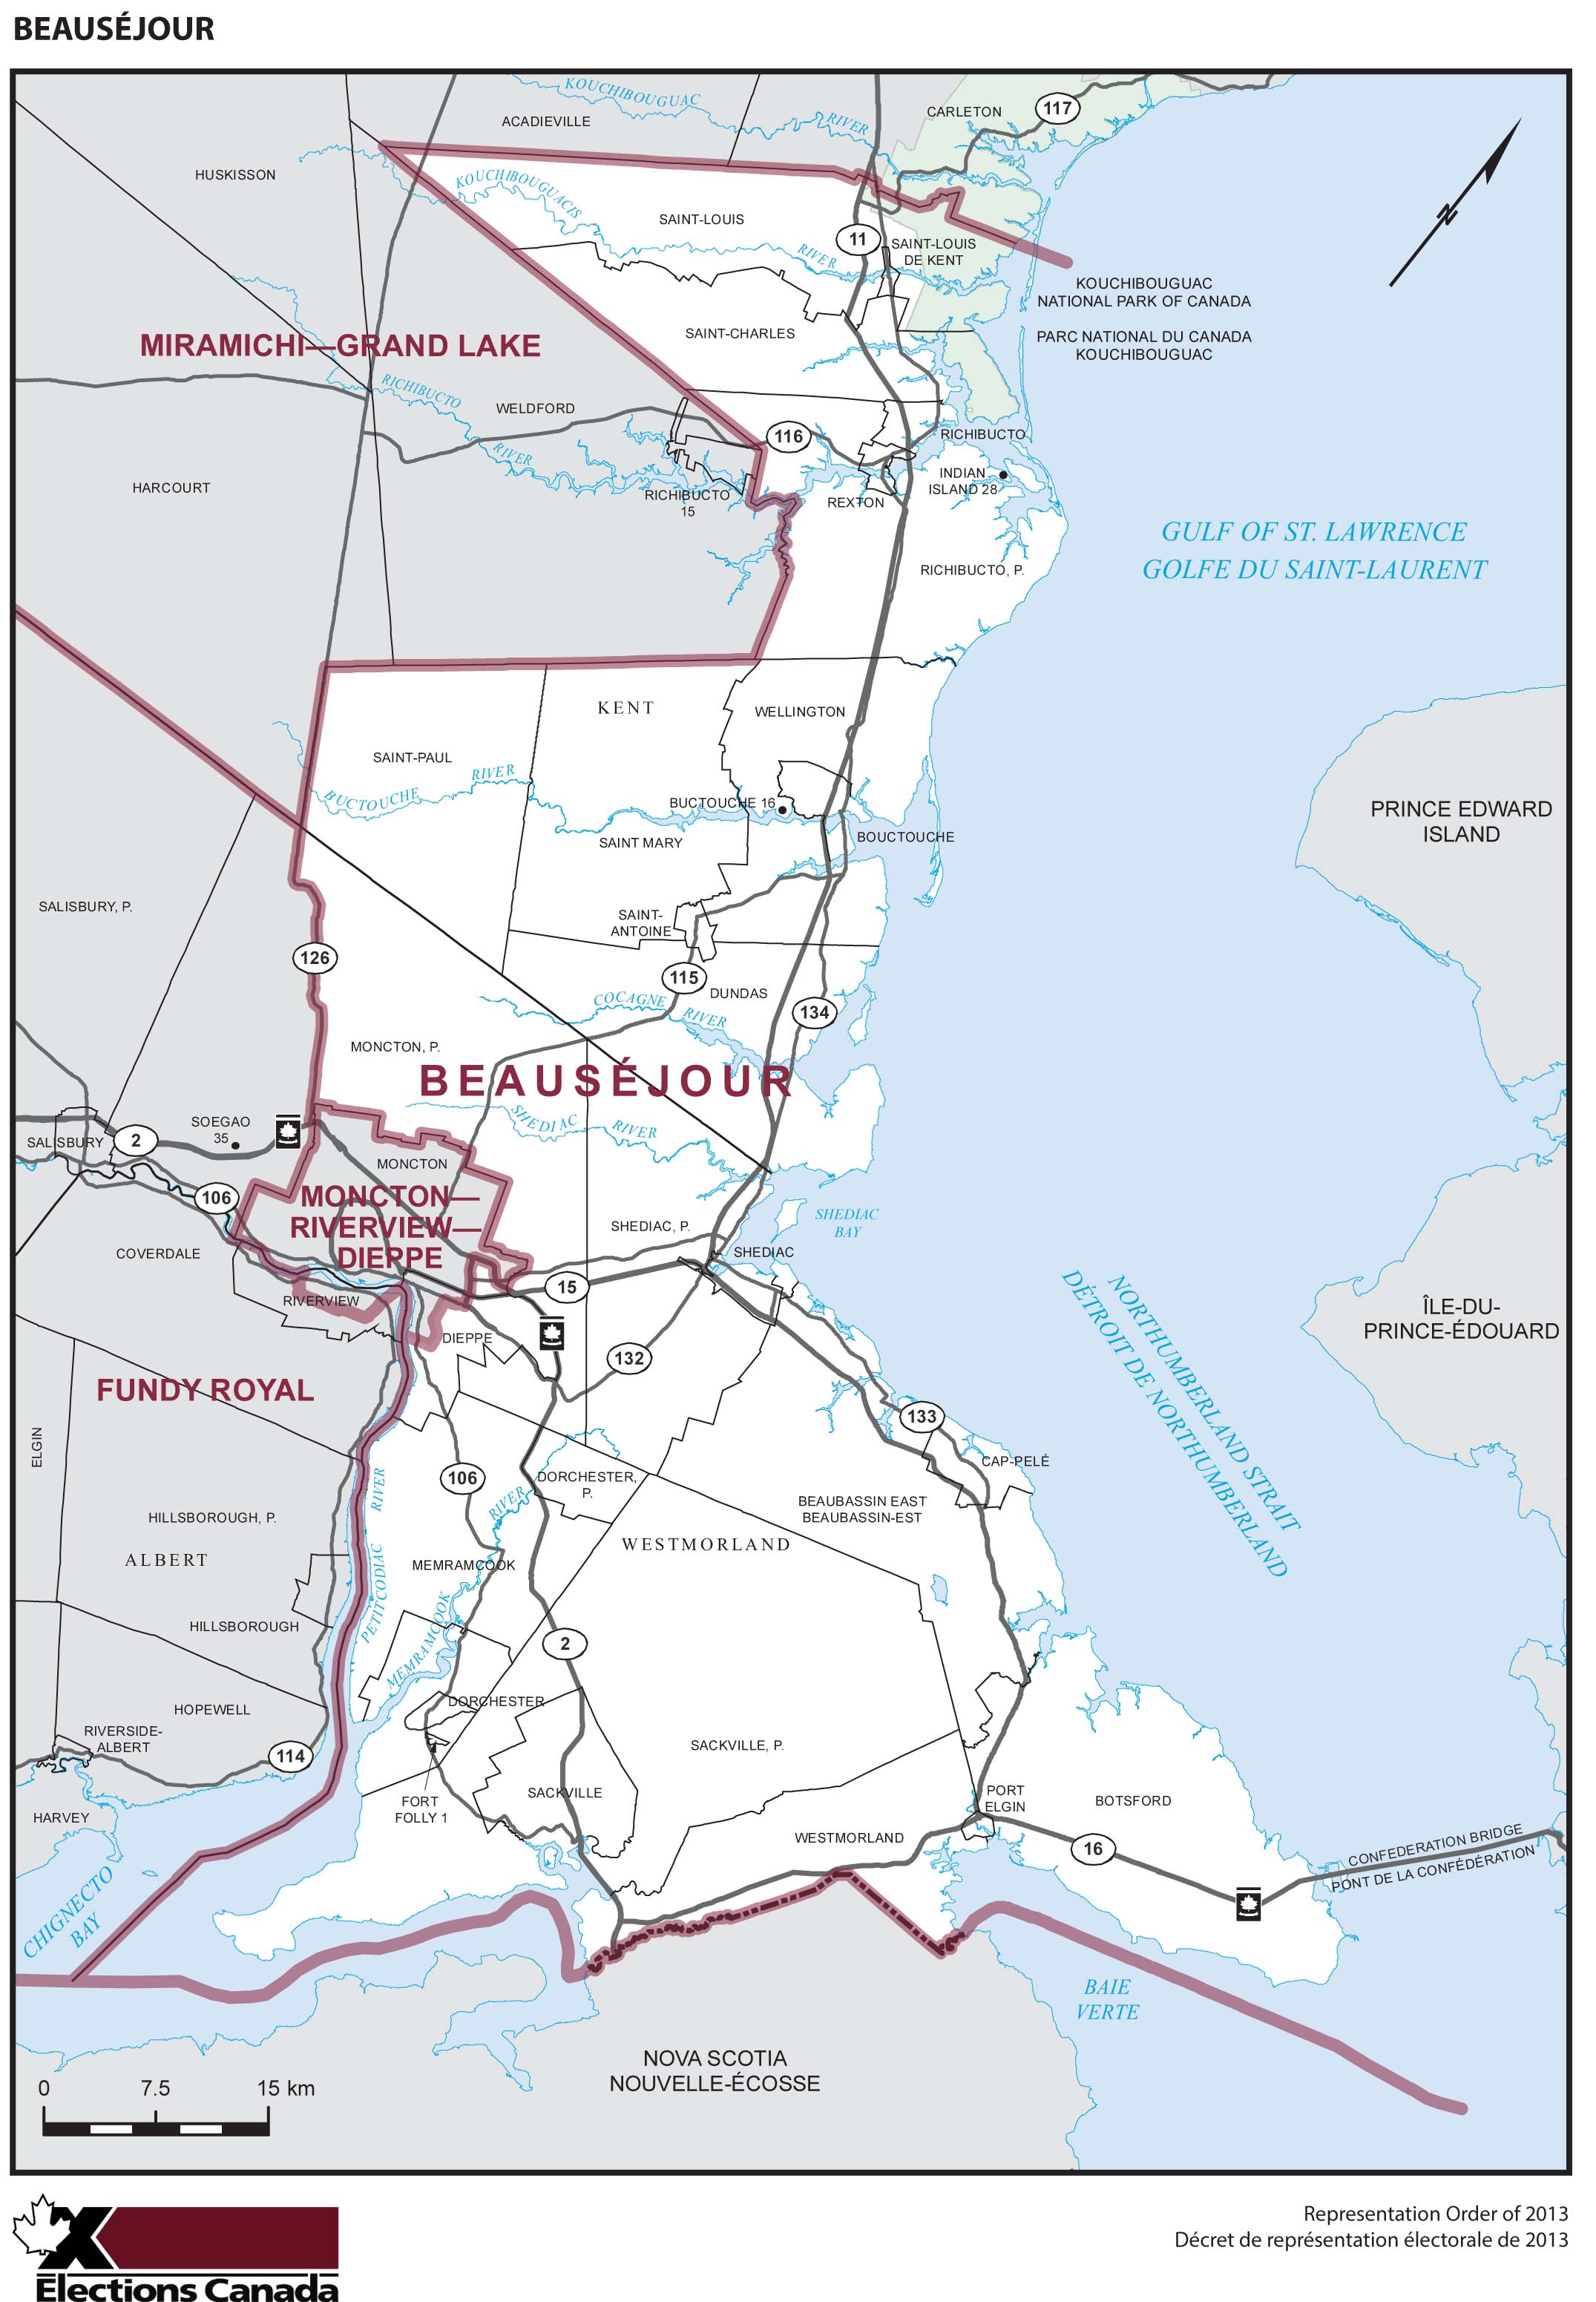 Map: Beauséjour, Federal electoral district, 2013 Representation Order (in white), New Brunswick